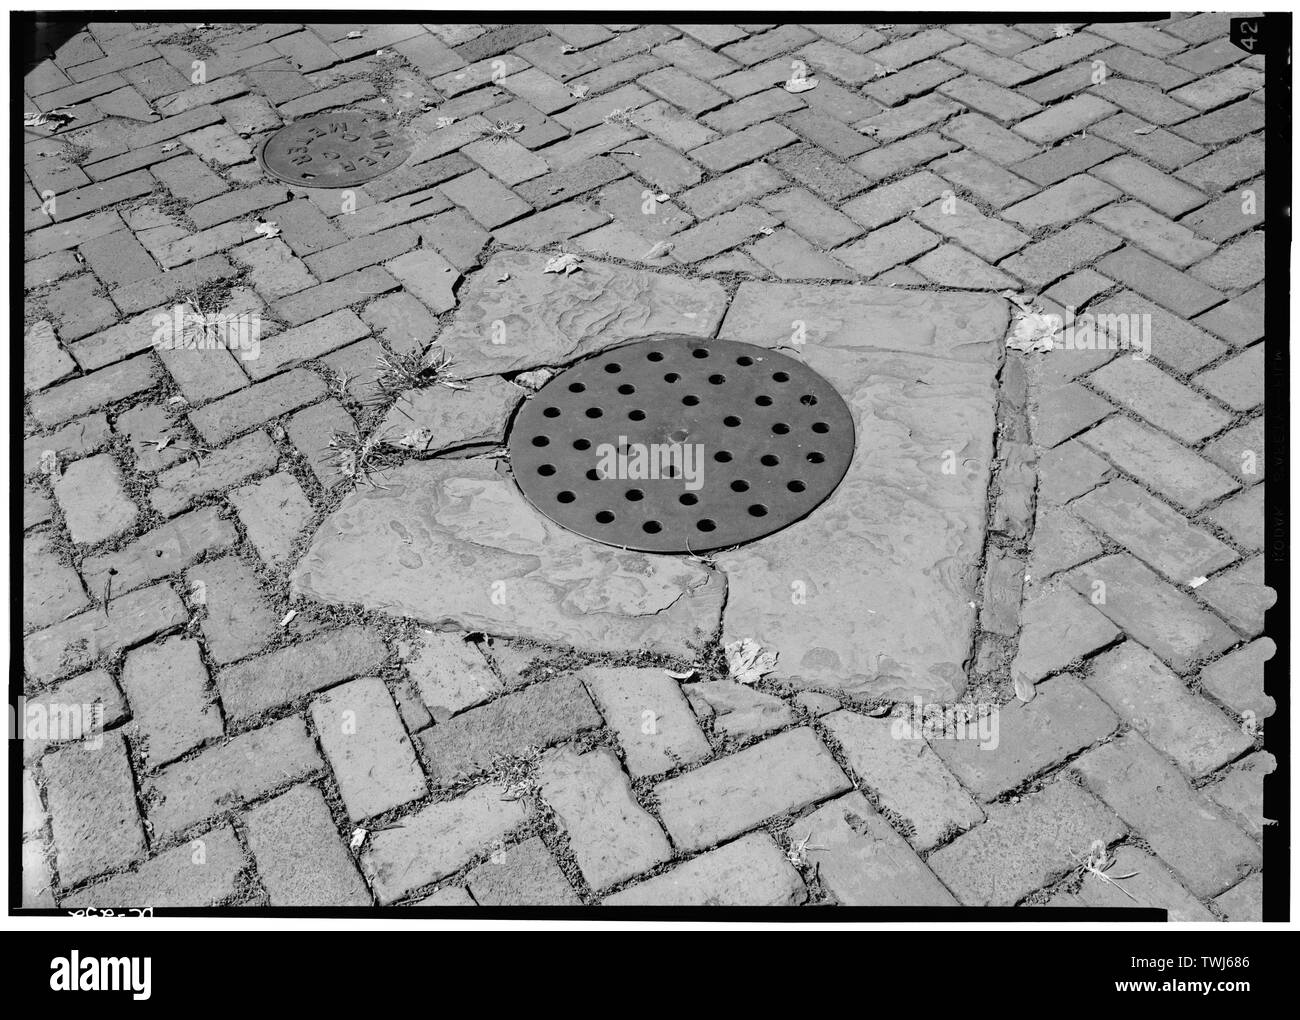 September 1969 PERFORATED COAL CHUTE COVER 3041 N STREET, N.W. - Georgetown Street Furniture, Georgetown Vicinity, Washington, District of Columbia, DC Stock Photo